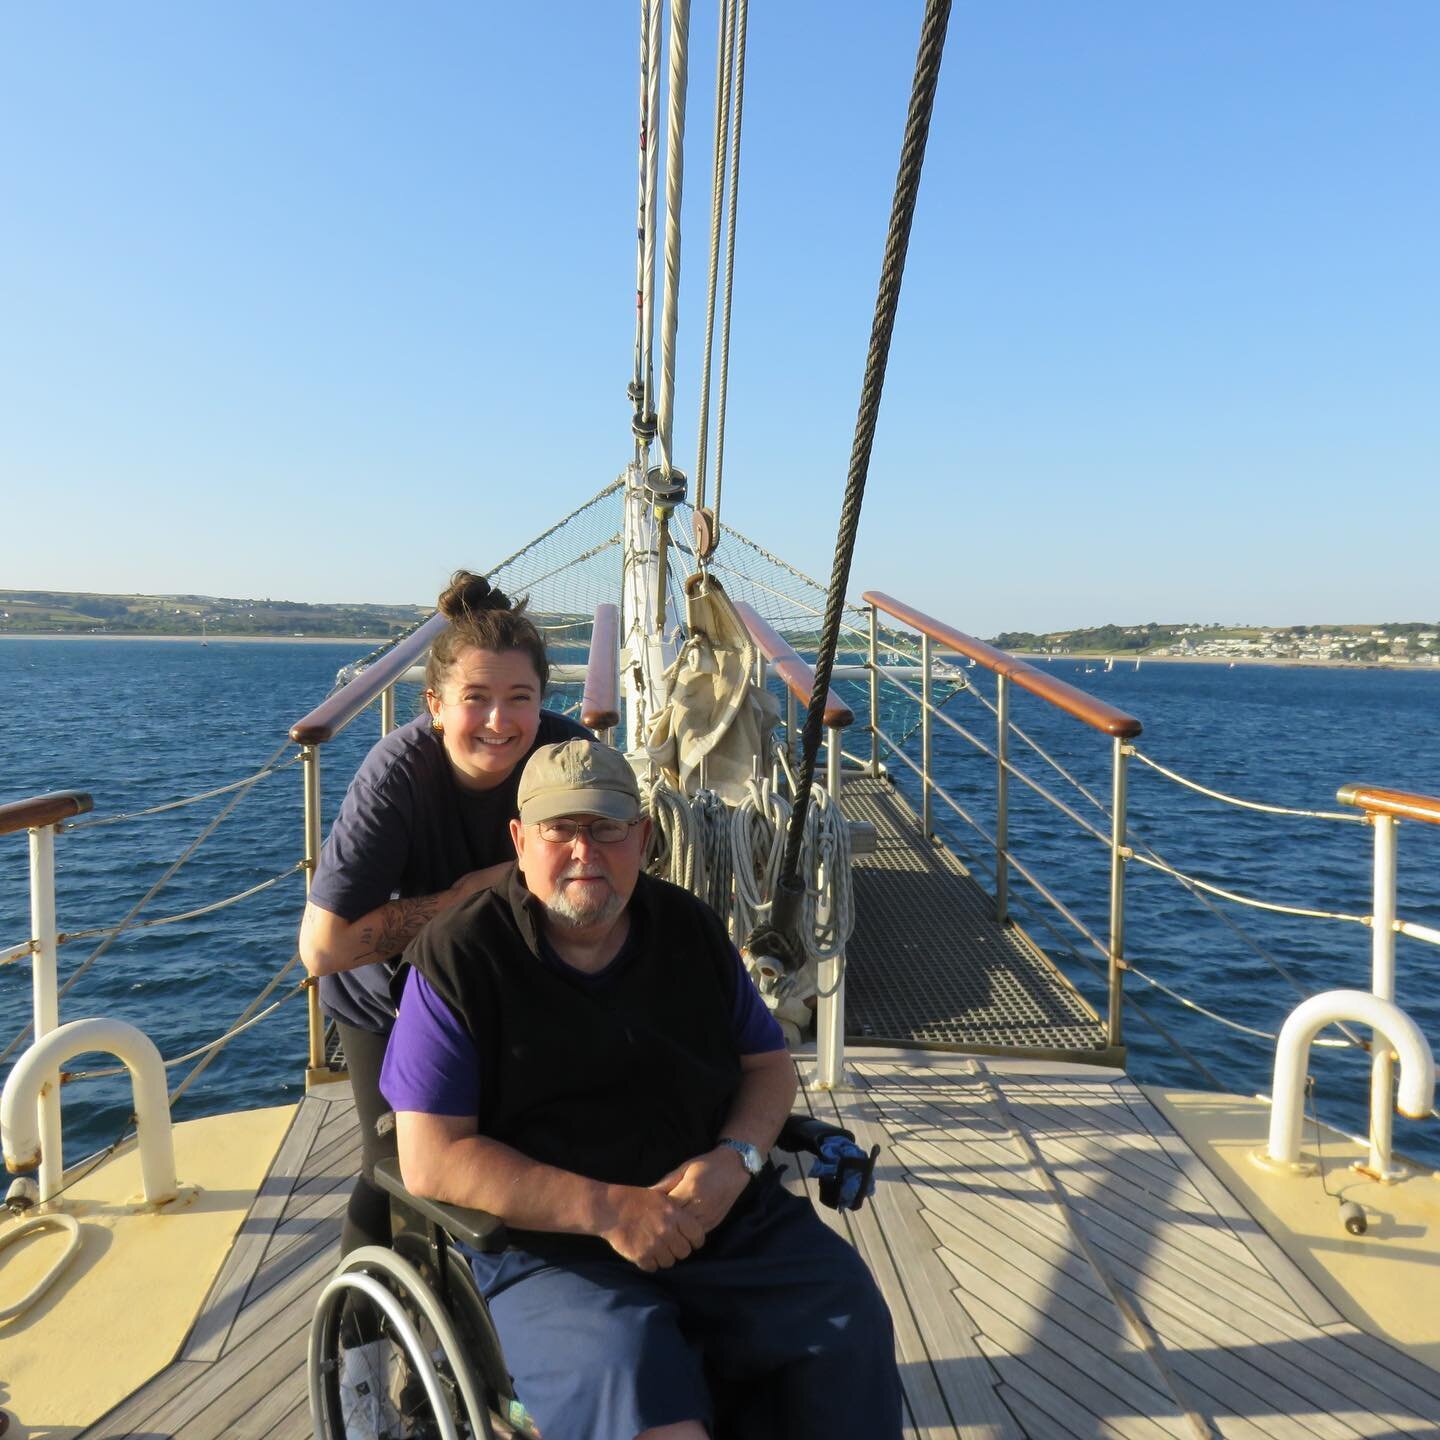 #throwback to chilling with my dad onboard #svtenacious 🥰 @jubileesailingtrust 

#accessibility #accessibletravel #tallships #jublieesailingtrust #travel #sailing